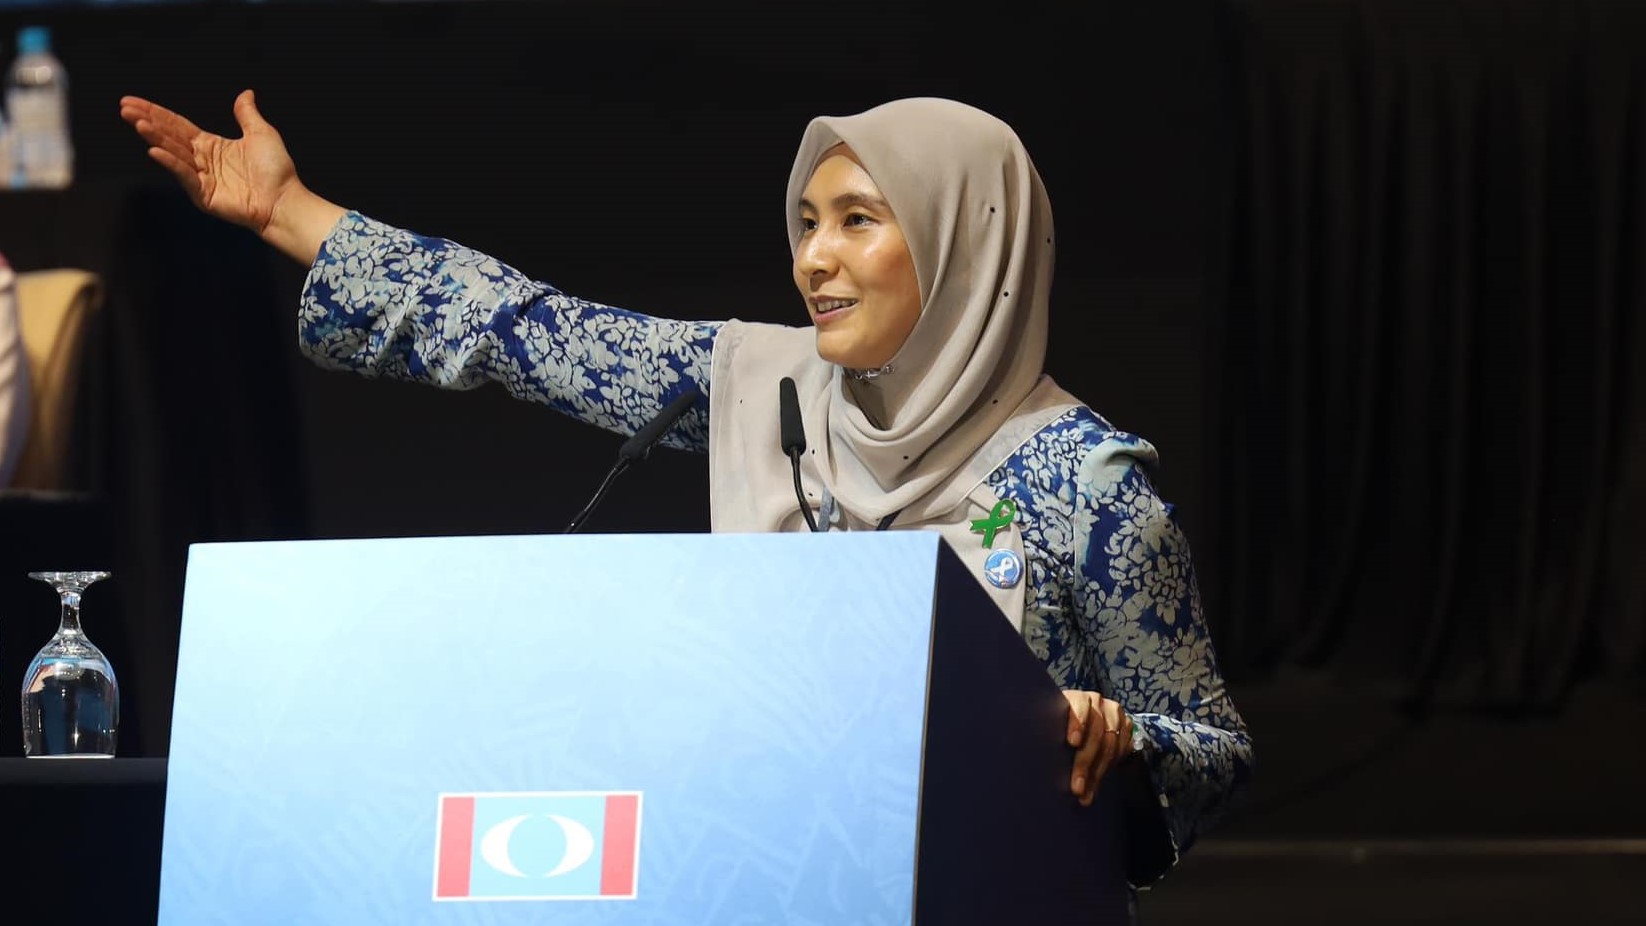 PKR marks 25th anniversary with festivities: Nurul Izzah announces May 11 carnival